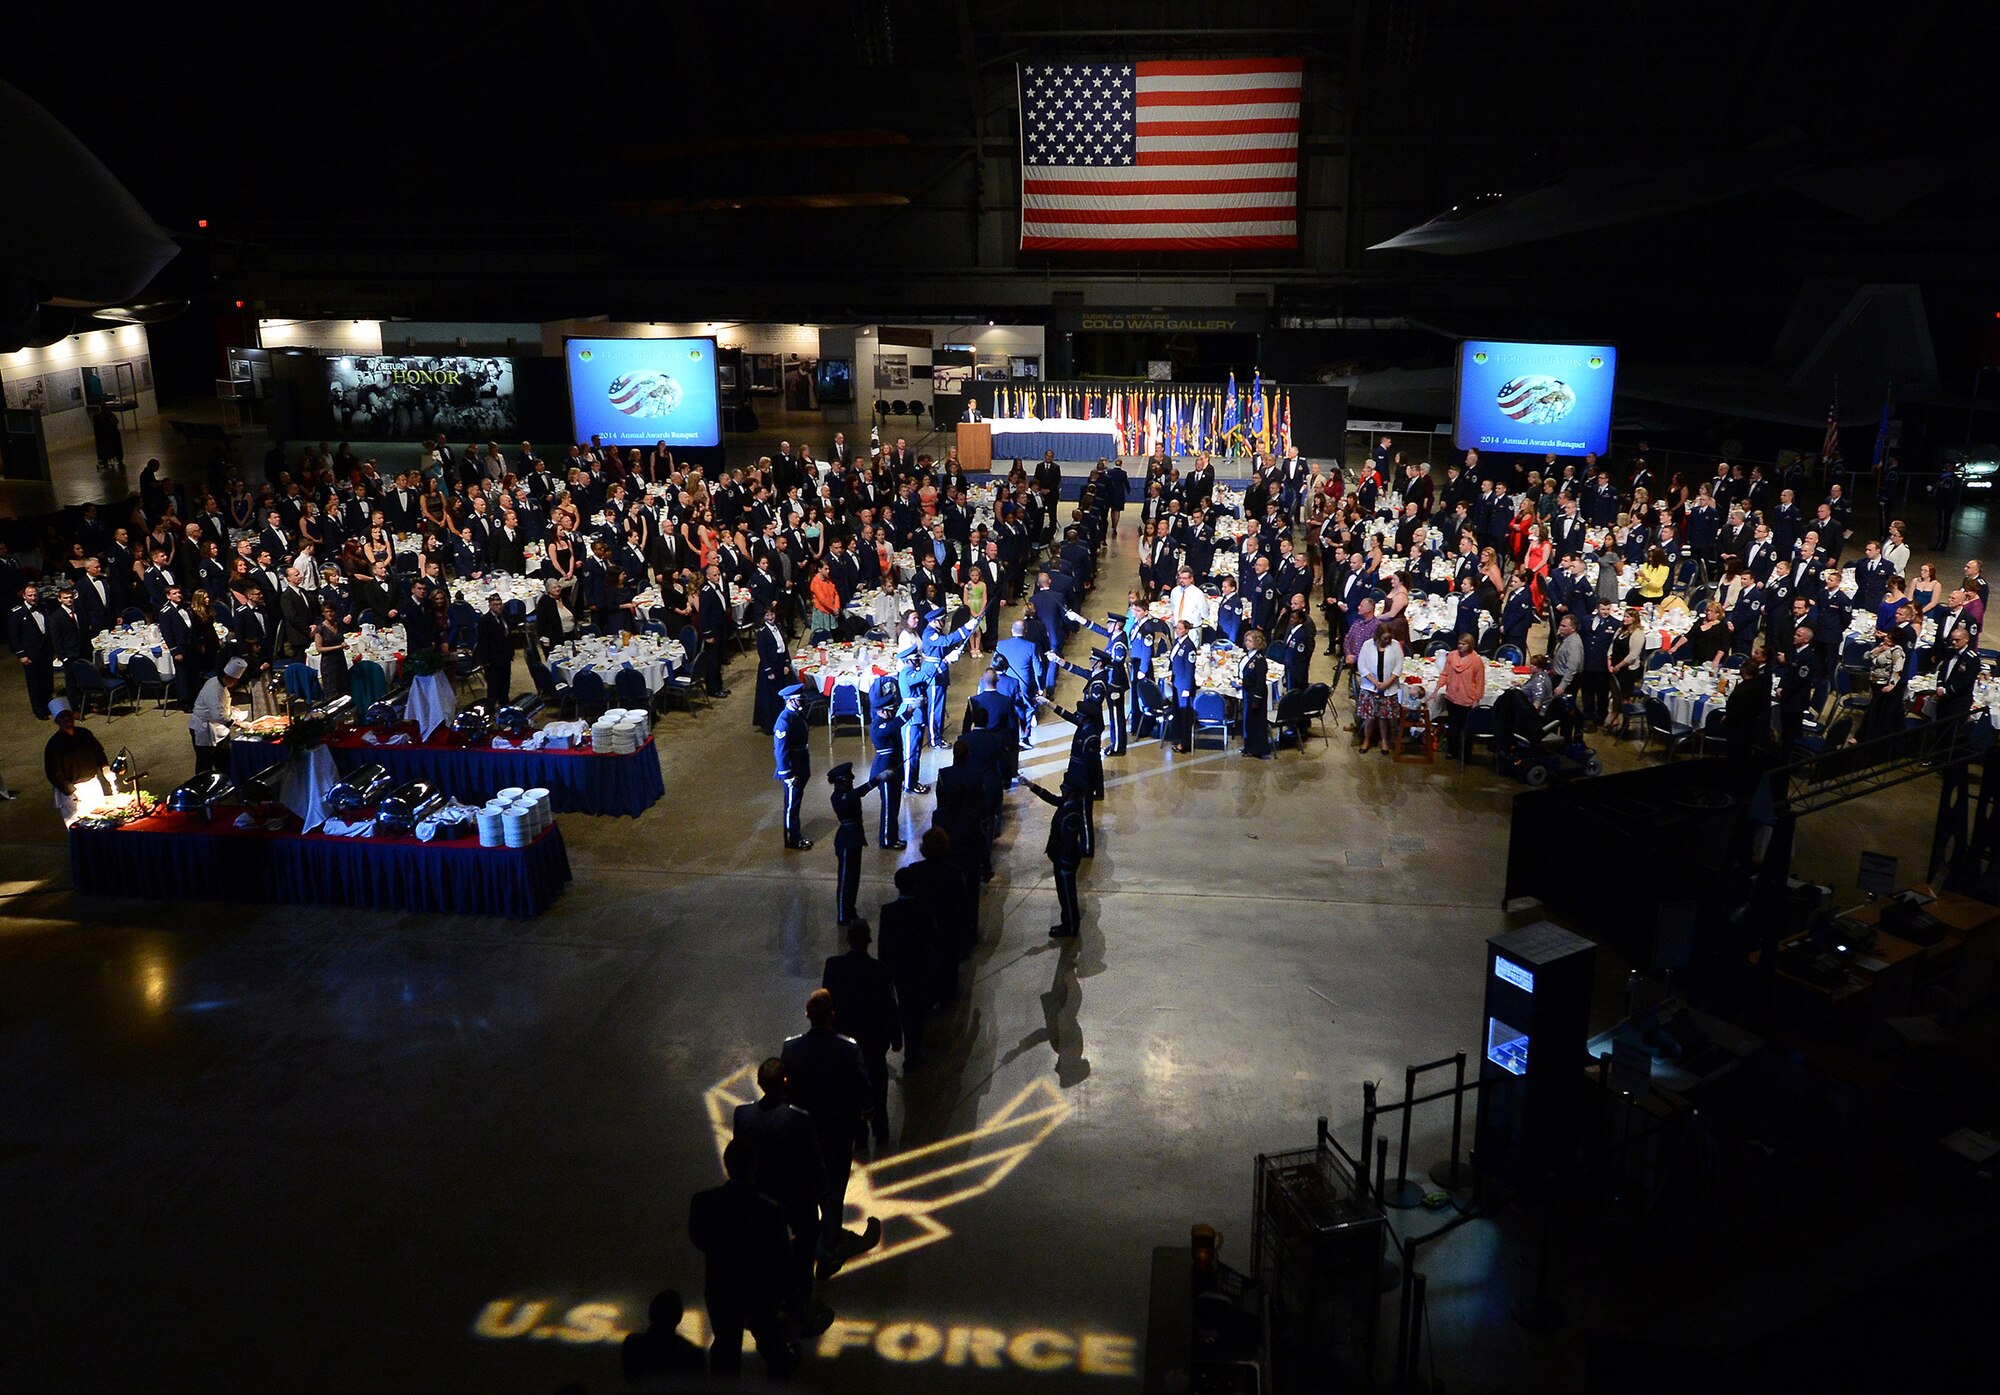 WRIGHT-PATTERSON AIR FORCE BASE, Ohio - The 445th Airlift Wing held its 2013 Annual Awards Banquet April 5, 2014 at the National Museum of the United States Air Force. More than 400 Airmen, family members and community leaders celebrated a night of achievements and accomplishments. (U.S. Air Force photo/Tech. Sgt. Frank Oliver)